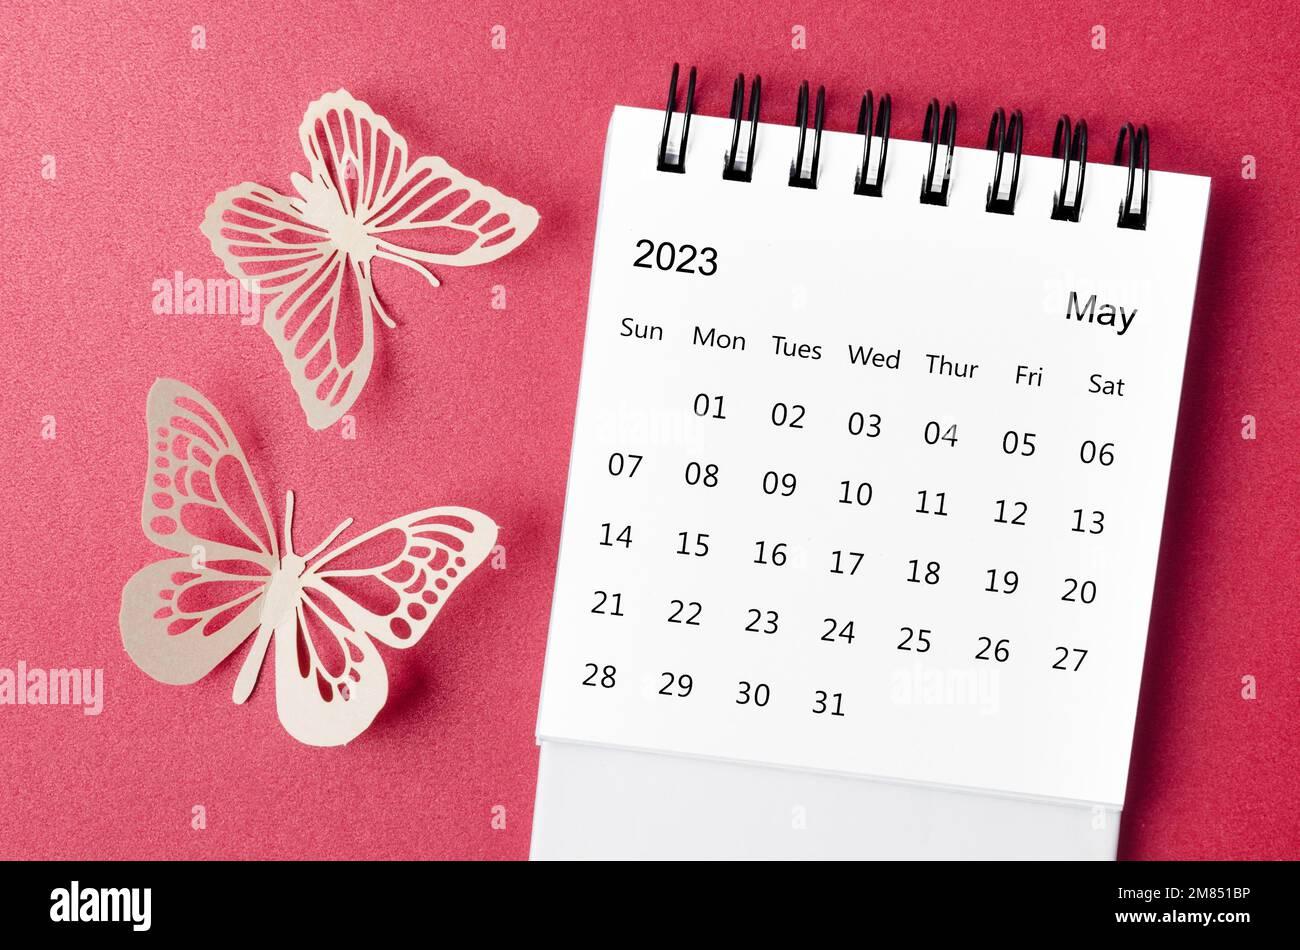 May 2023 desk calendar for the organizer to plan and reminder with